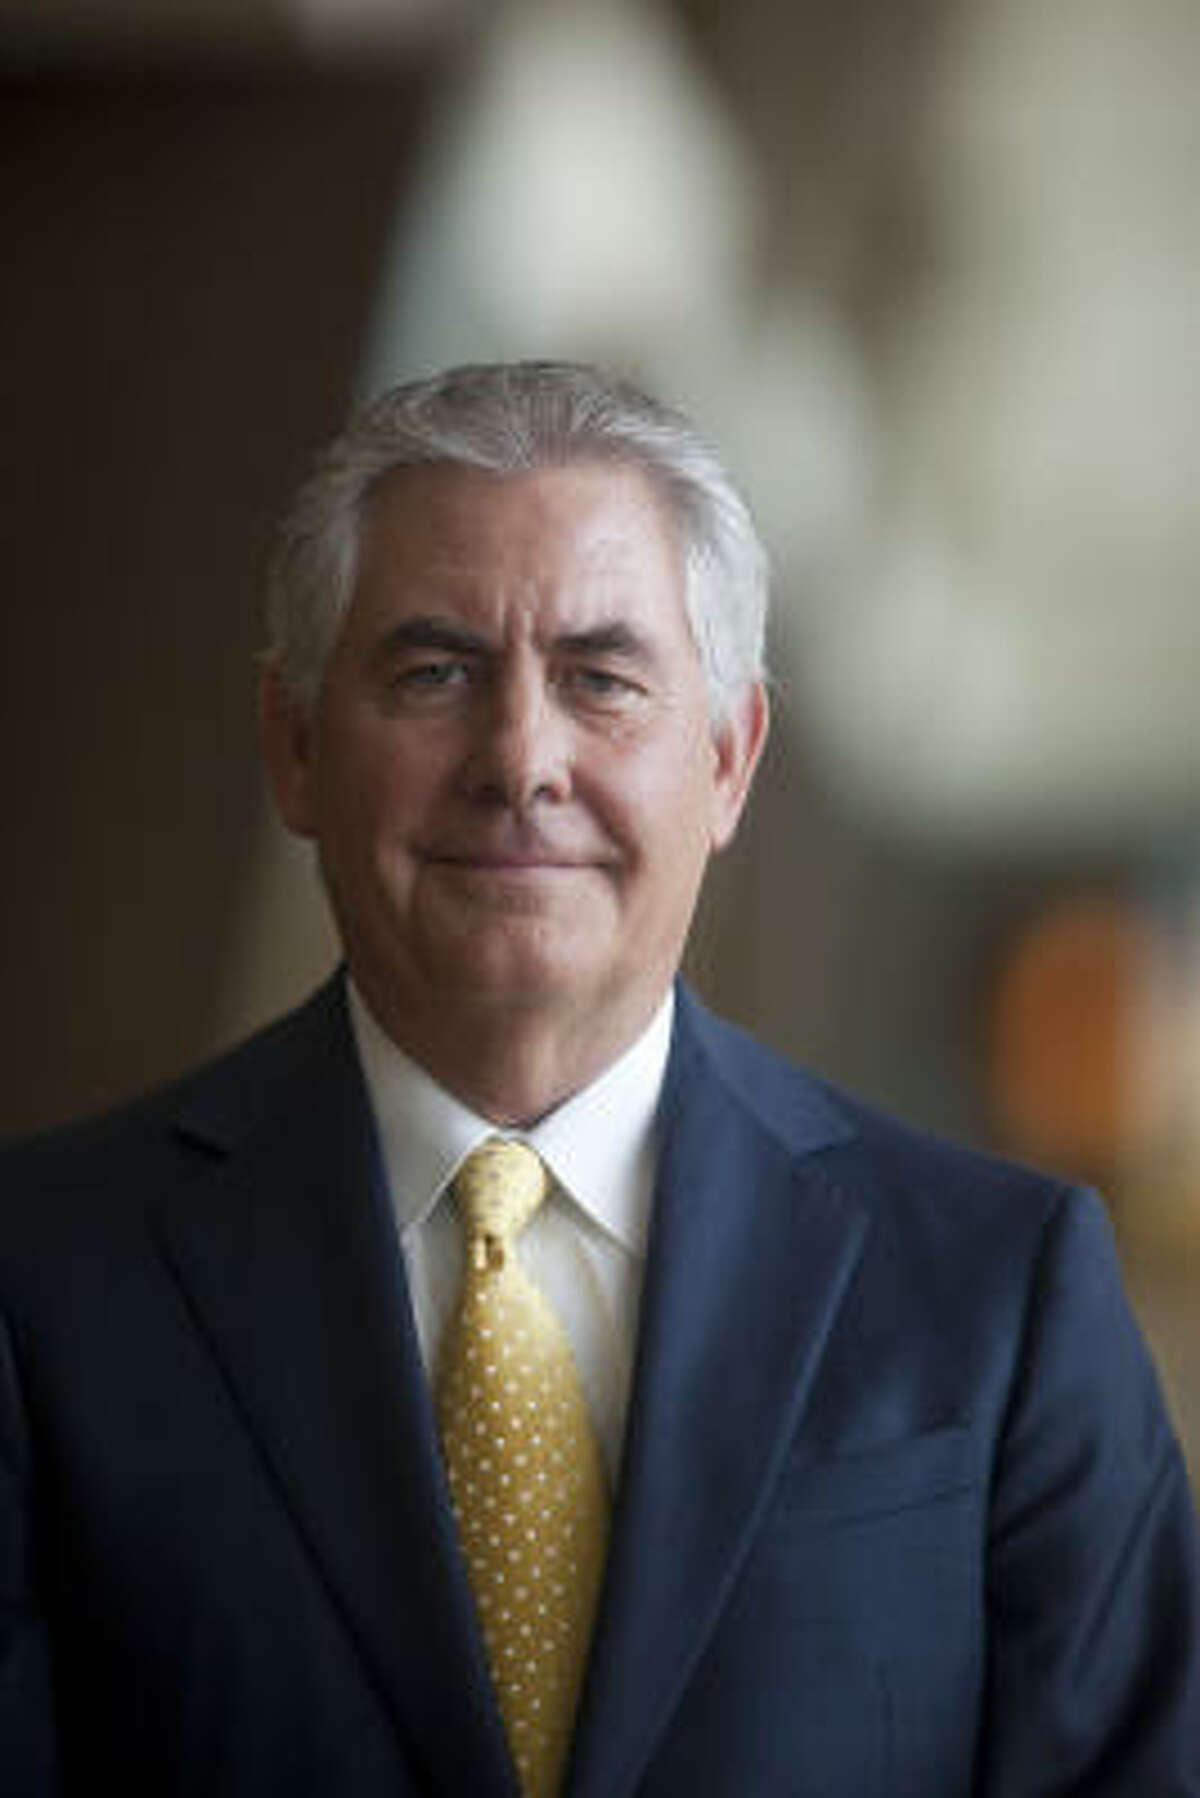 Rex Tillerson, chairman and CEO of Exxon Mobil, said government can help keep energy prices in check by refusing to “over-regulate” the oil and natural gas industry.